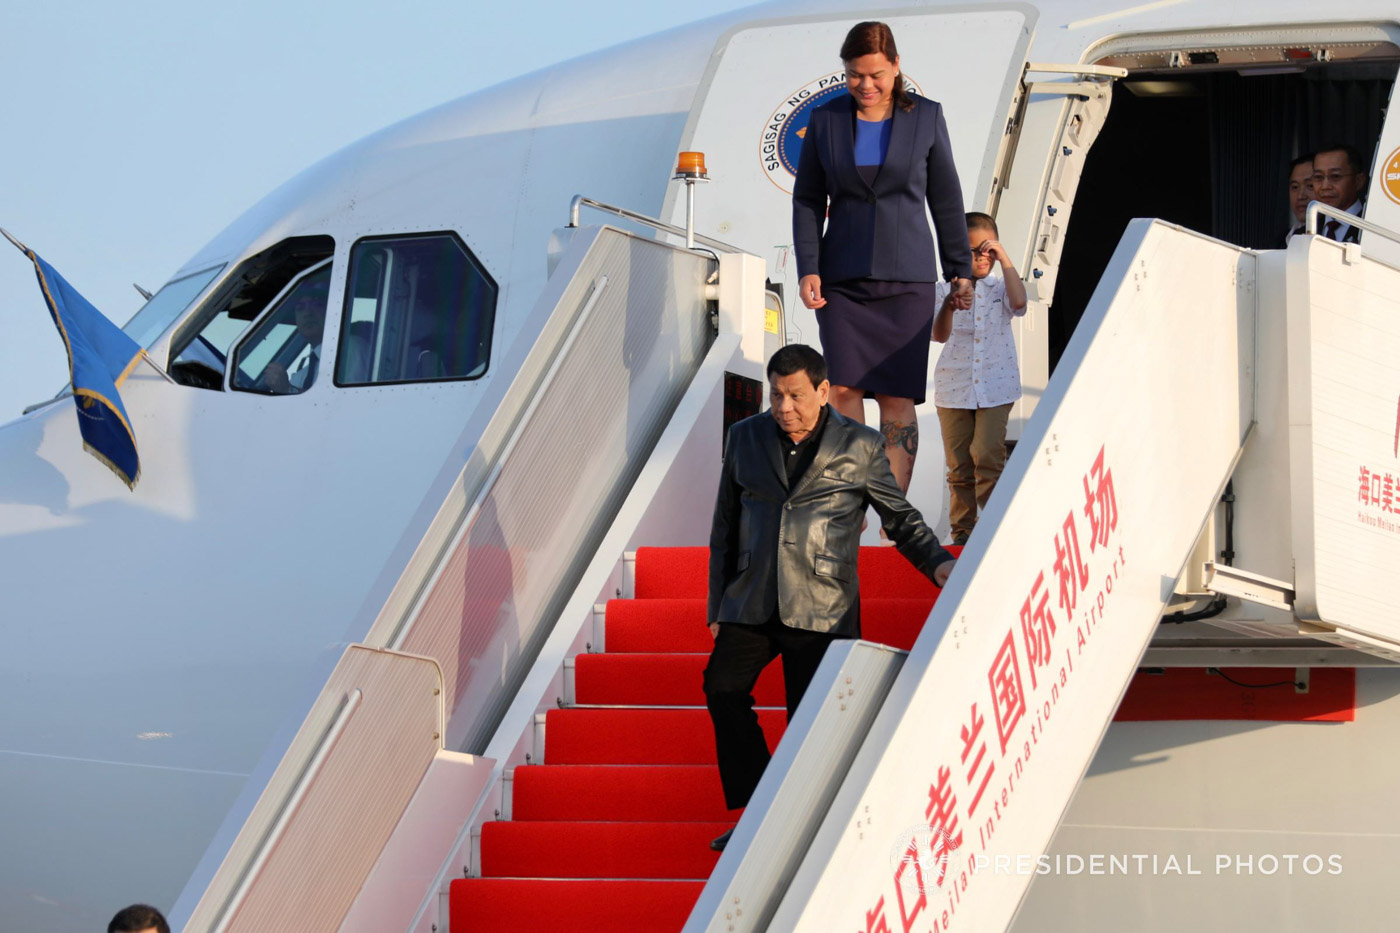 CHARTERED FLIGHT. President Rodrigo Duterte disembarks from a Philippine Airlines chartered flight upon his arrival at the Qionghai Bo'ao International Airport in Hainan, China on April 9, 2018. Malacañang file photo 